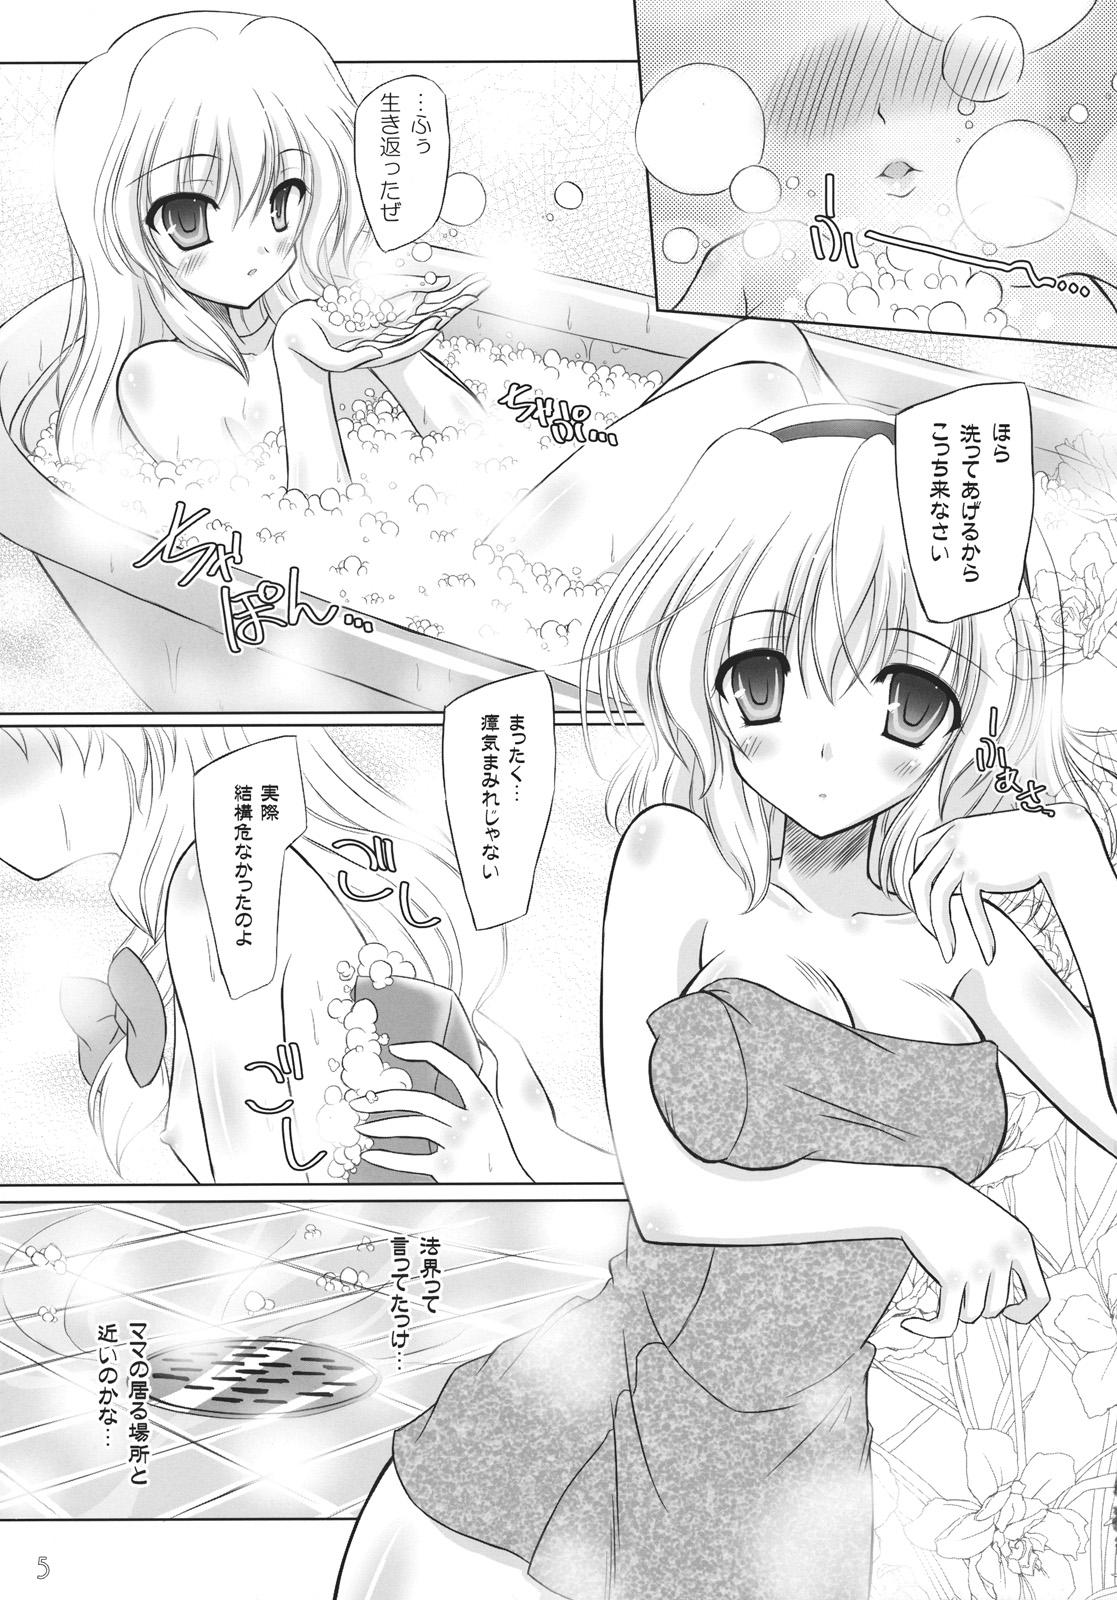 Screaming Arioso Marriage - Touhou project Lolicon - Page 5